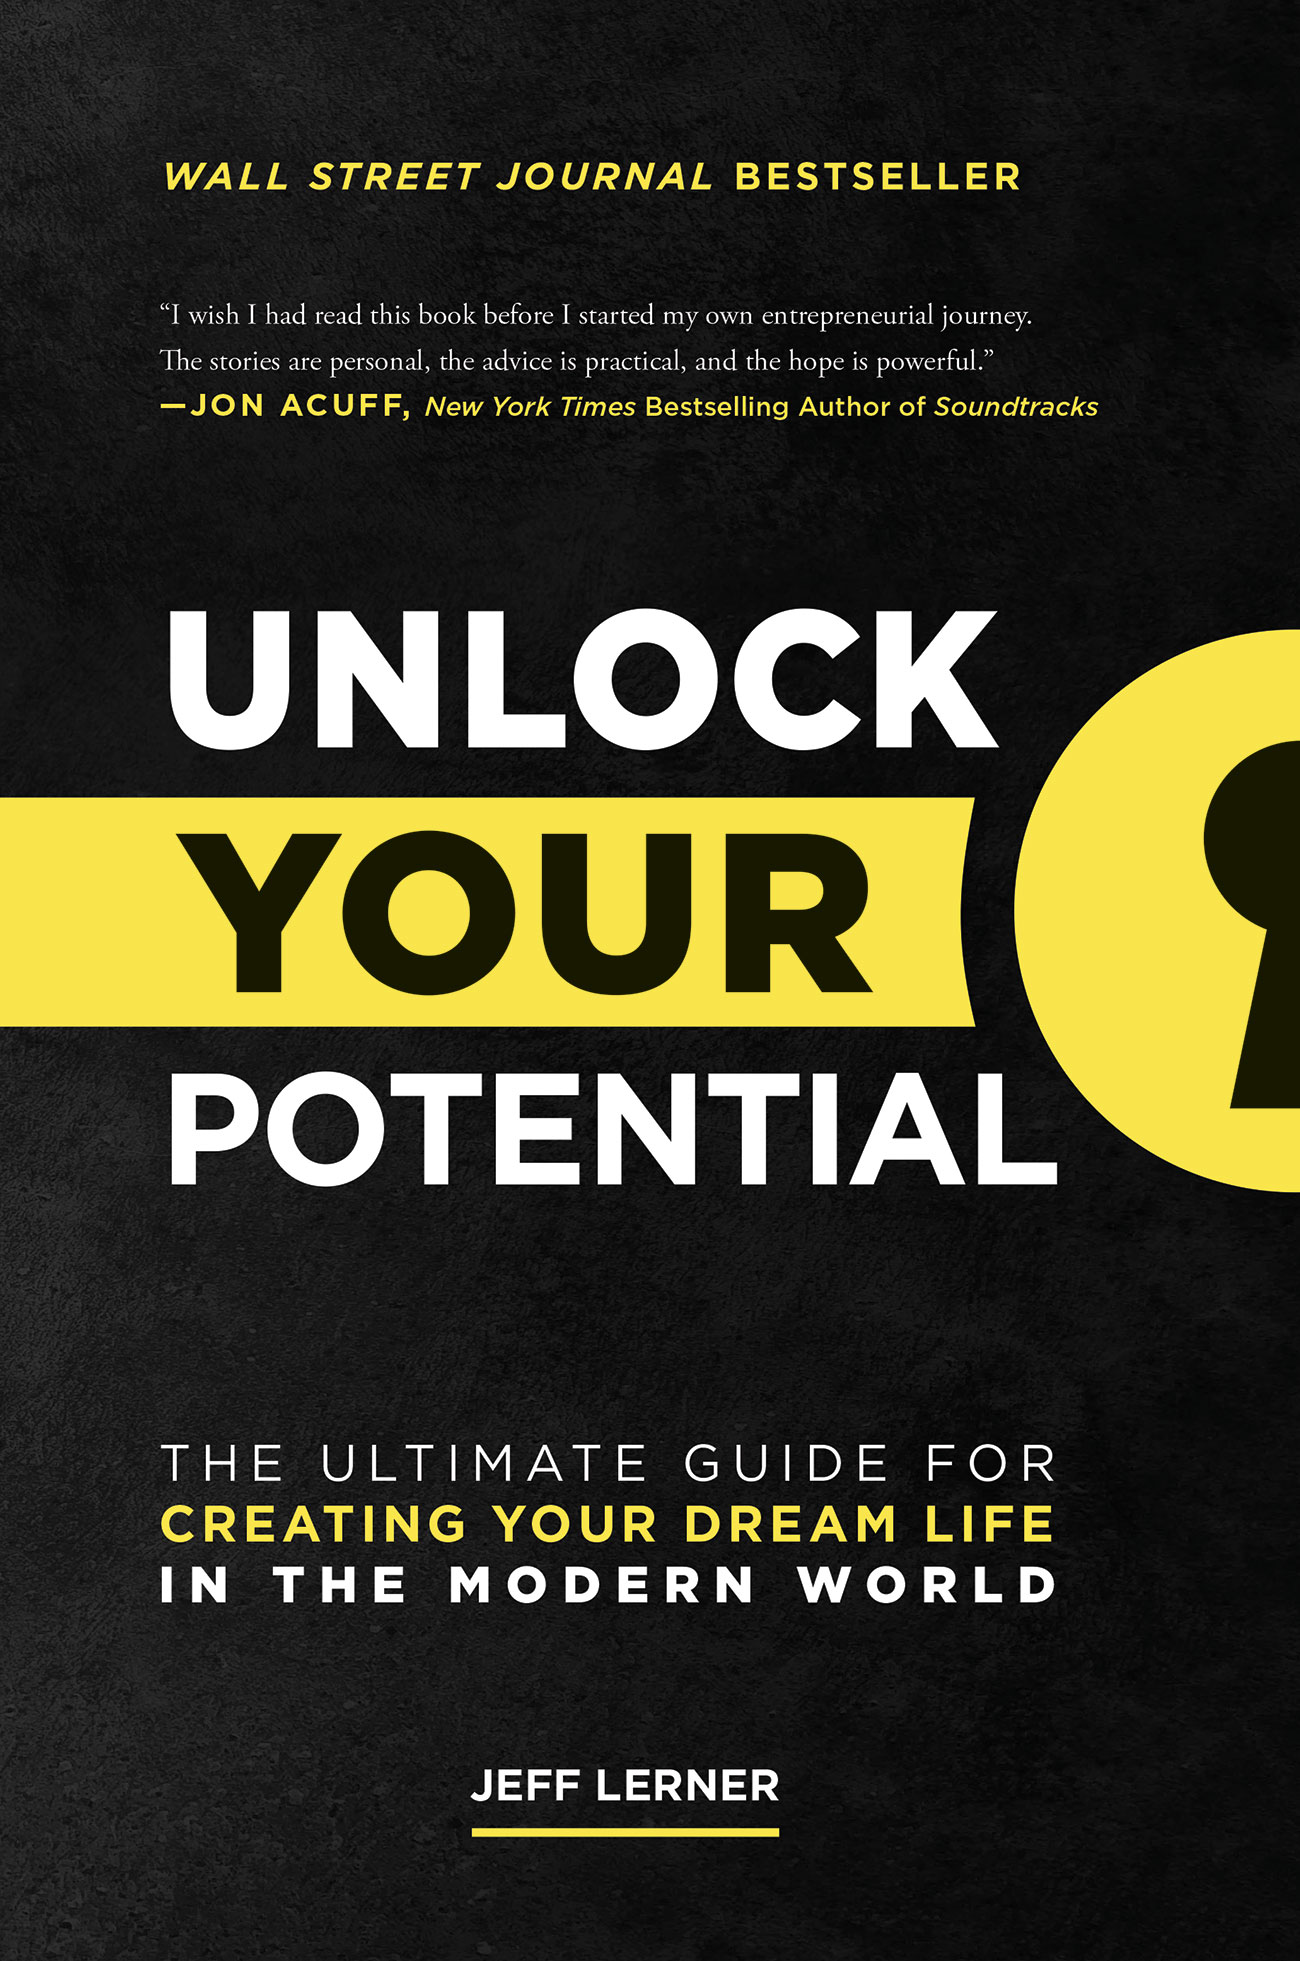 unlock-your-potential-1 Degree  : Unlocking Your Potential